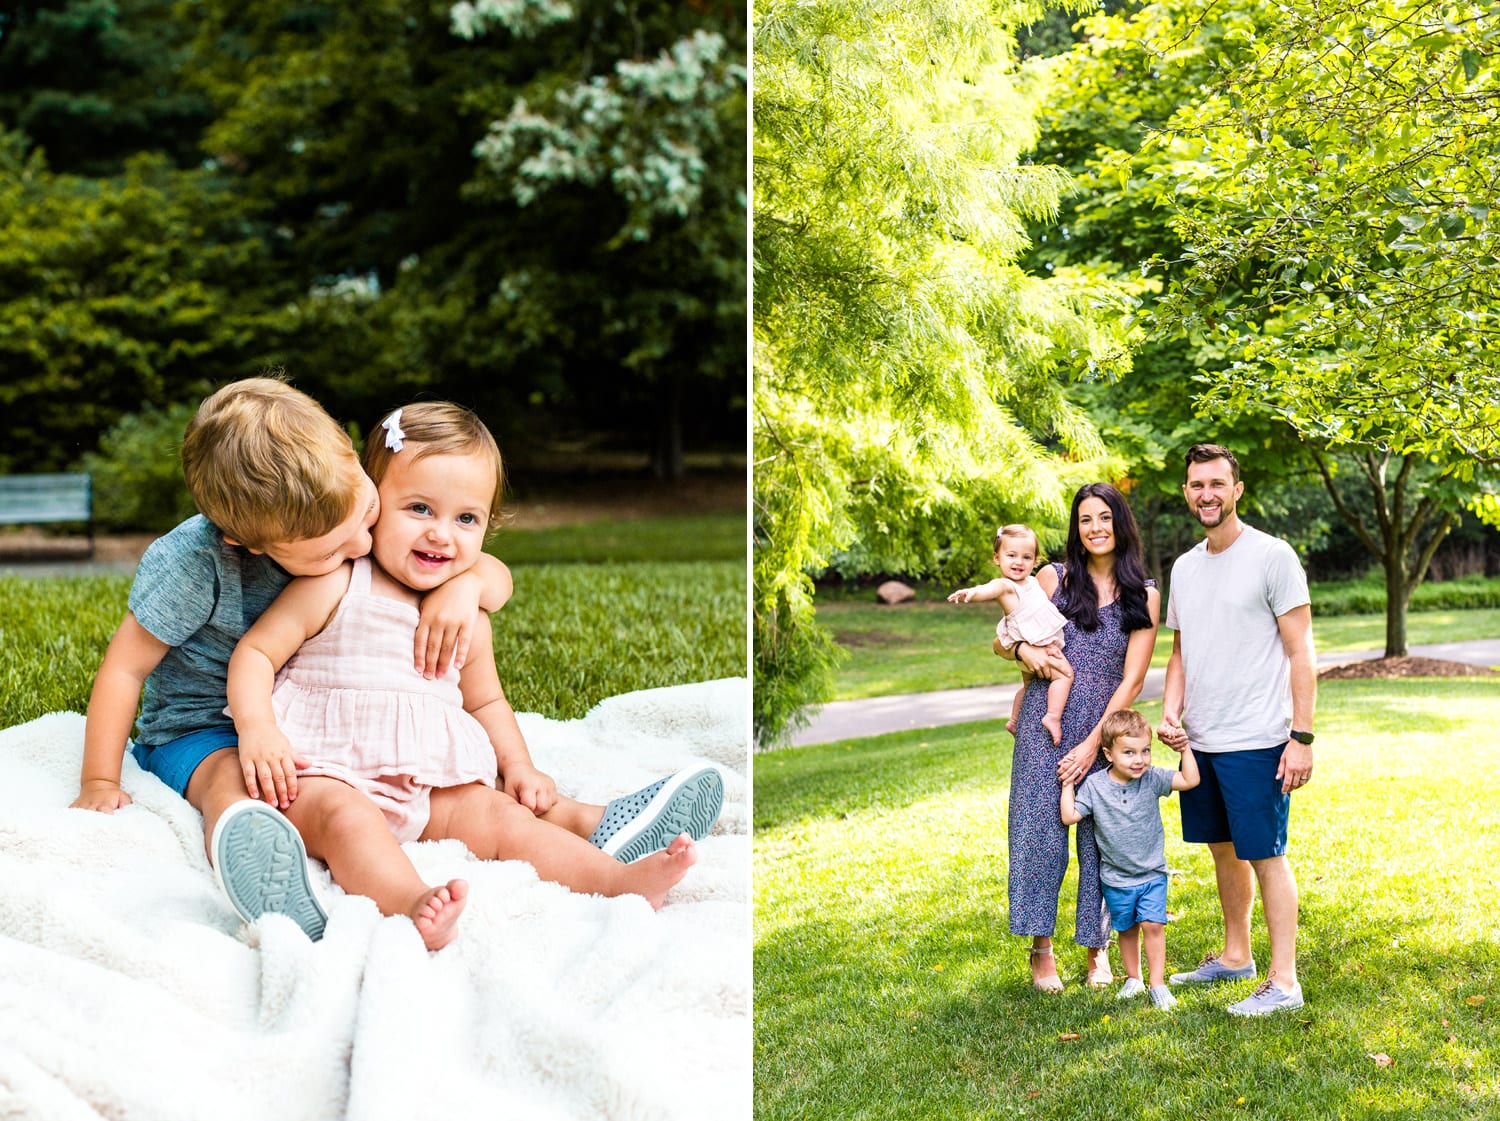 Family photography at Oakes Park in Old Tappan.